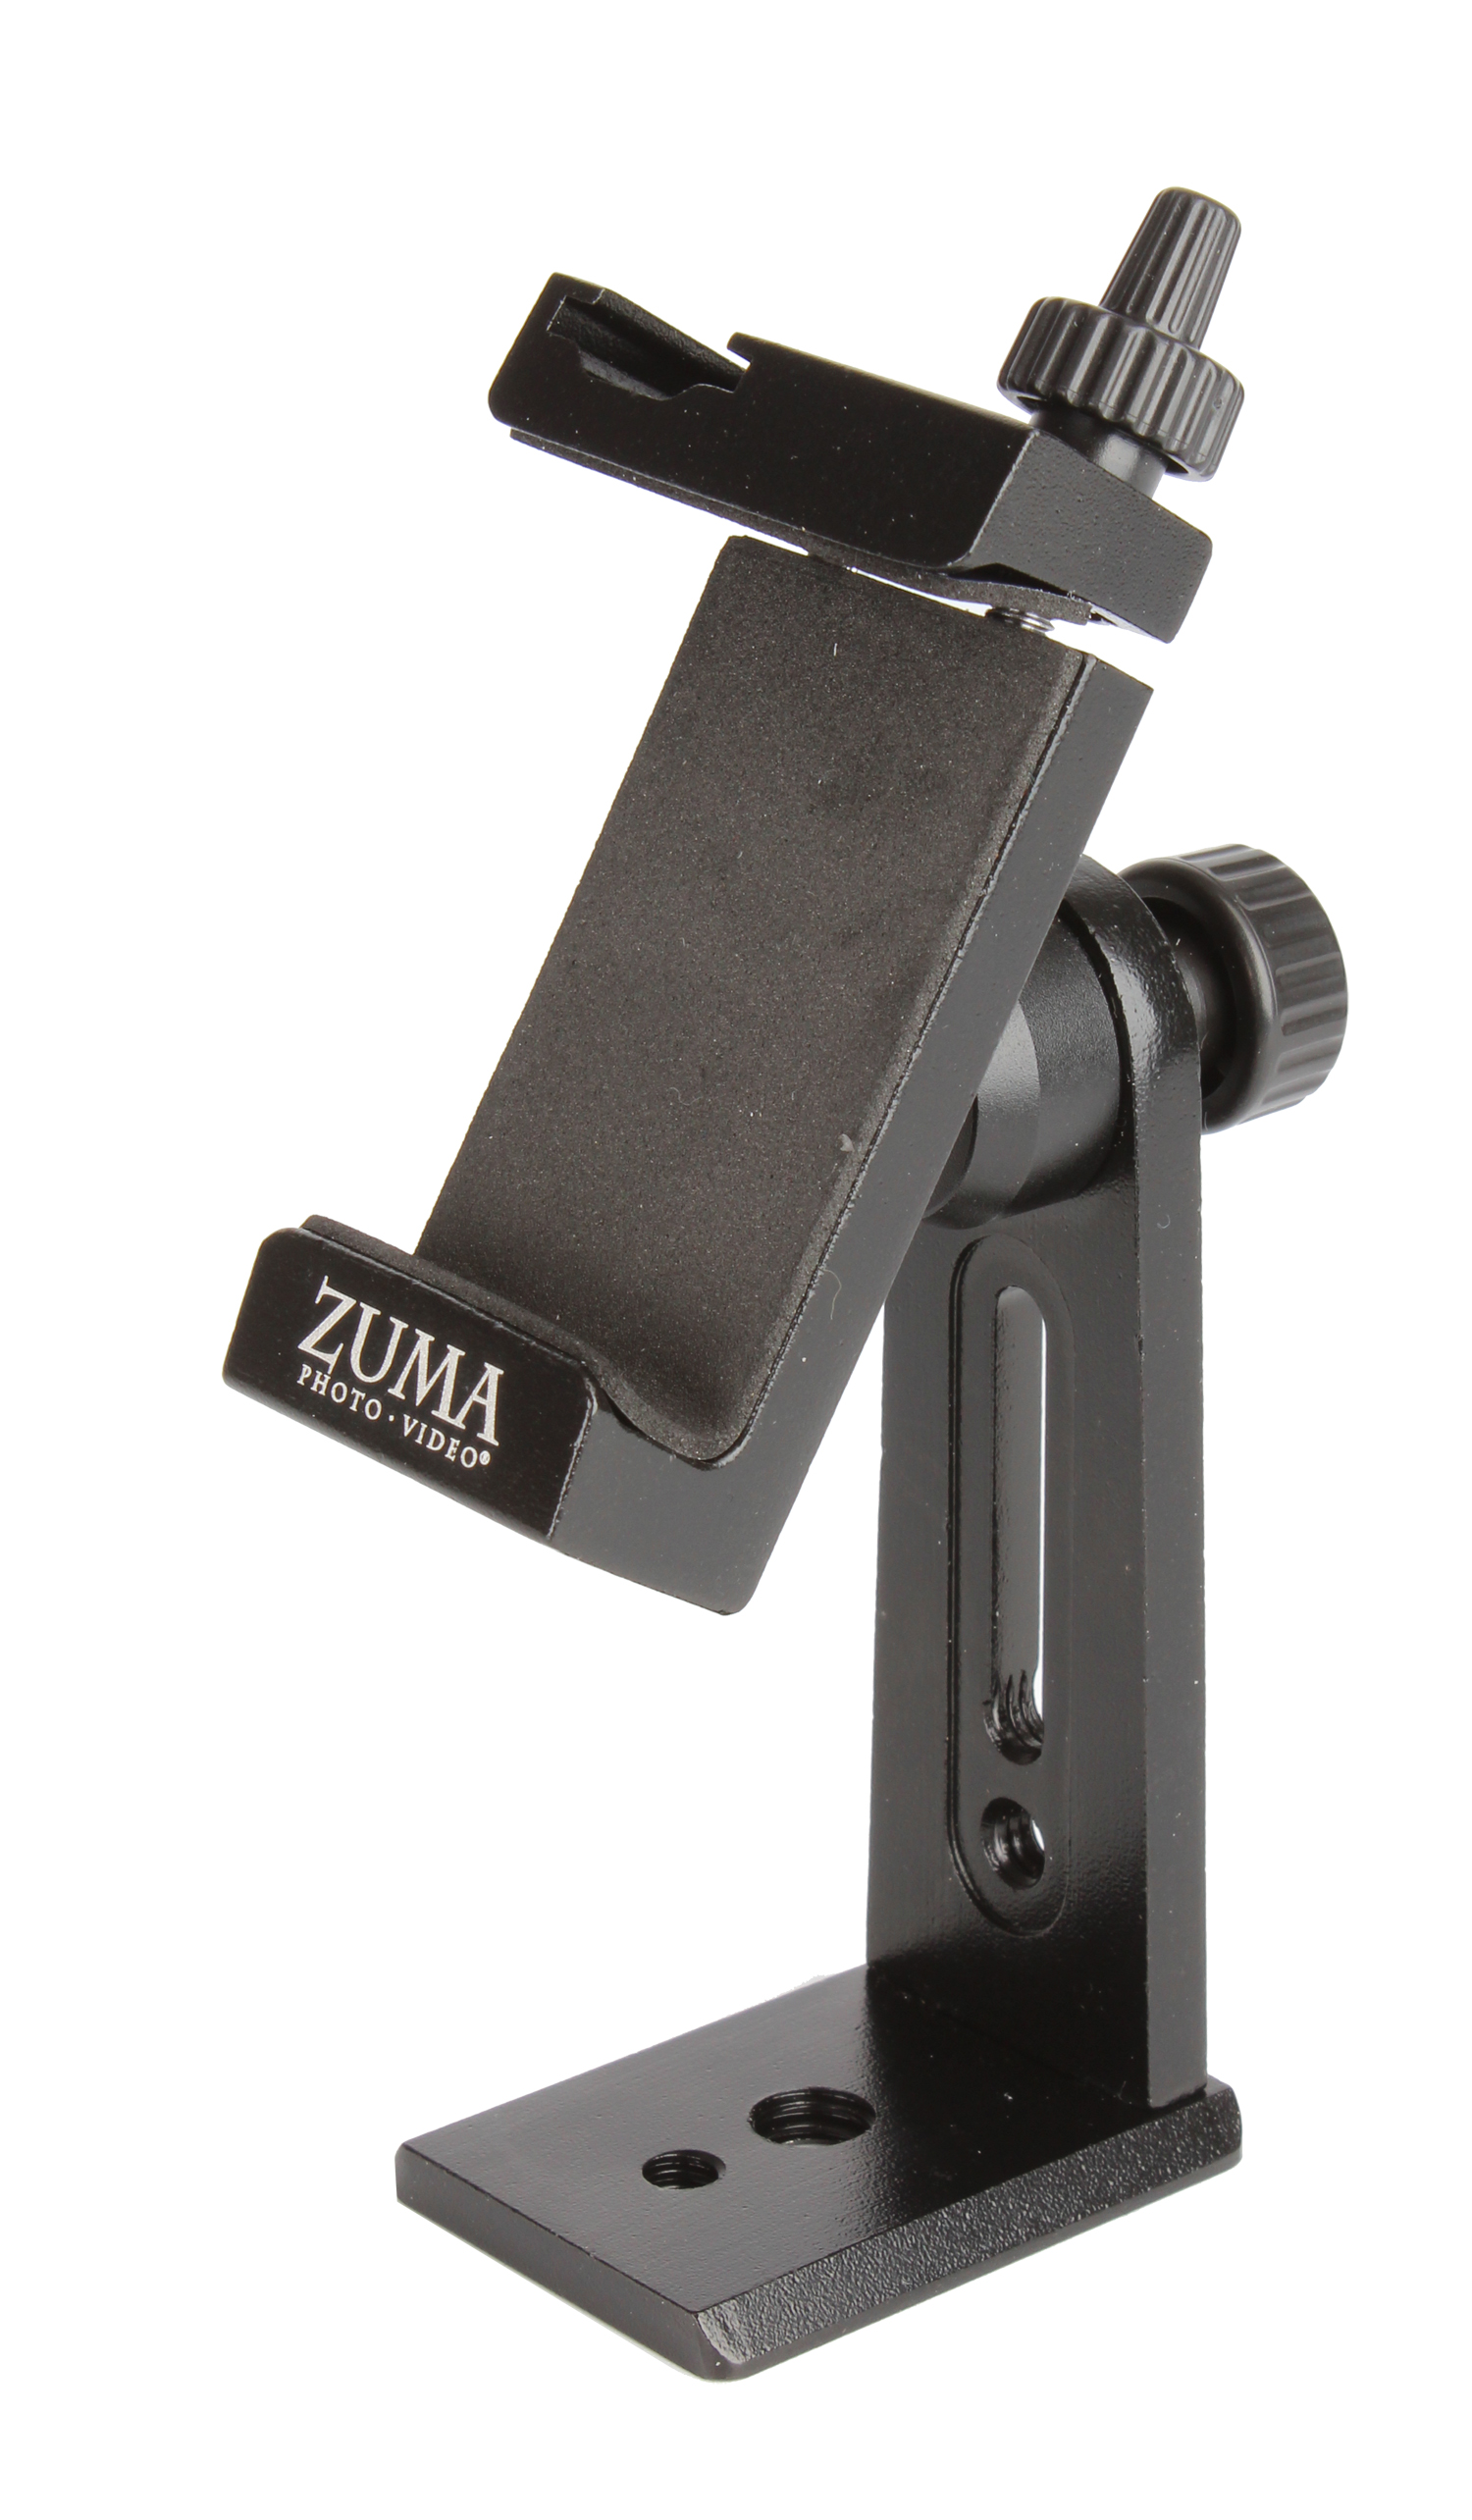 Spring Clamp w/ Metal Ball Head & Cold Shoe Mount for Studio Backdrop Zuma 3 in 